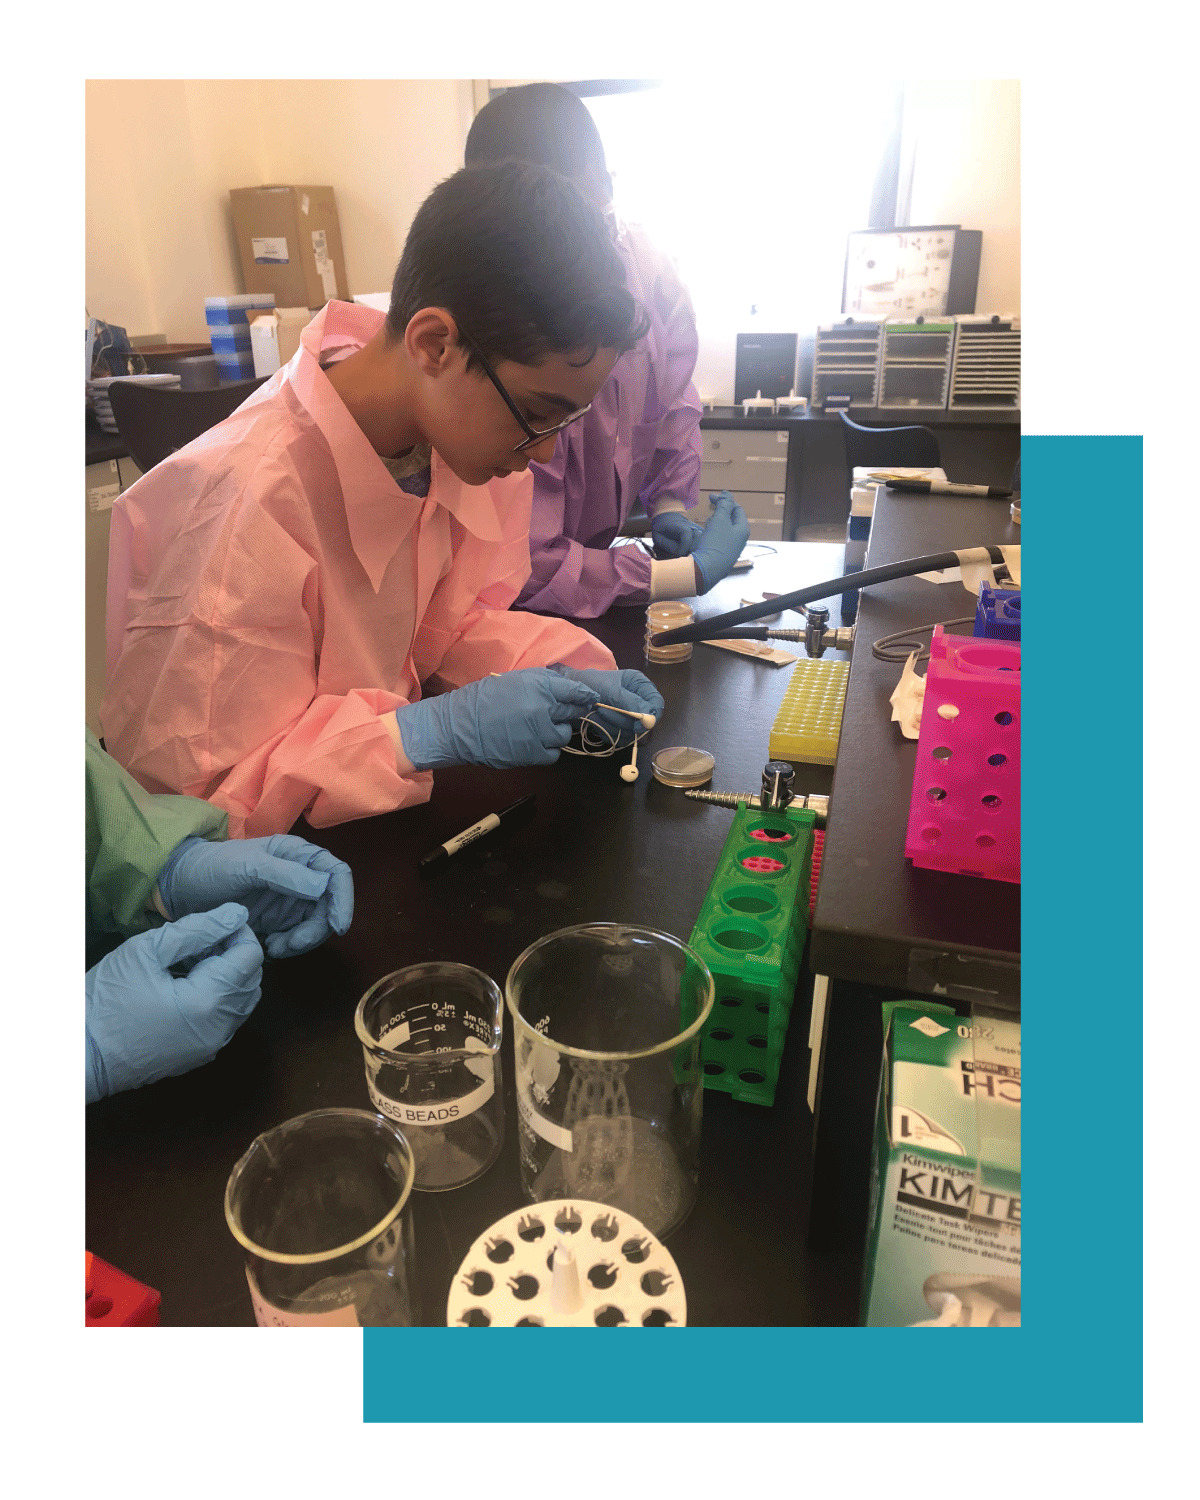 STEP student Omer Mosker working in a science lab.